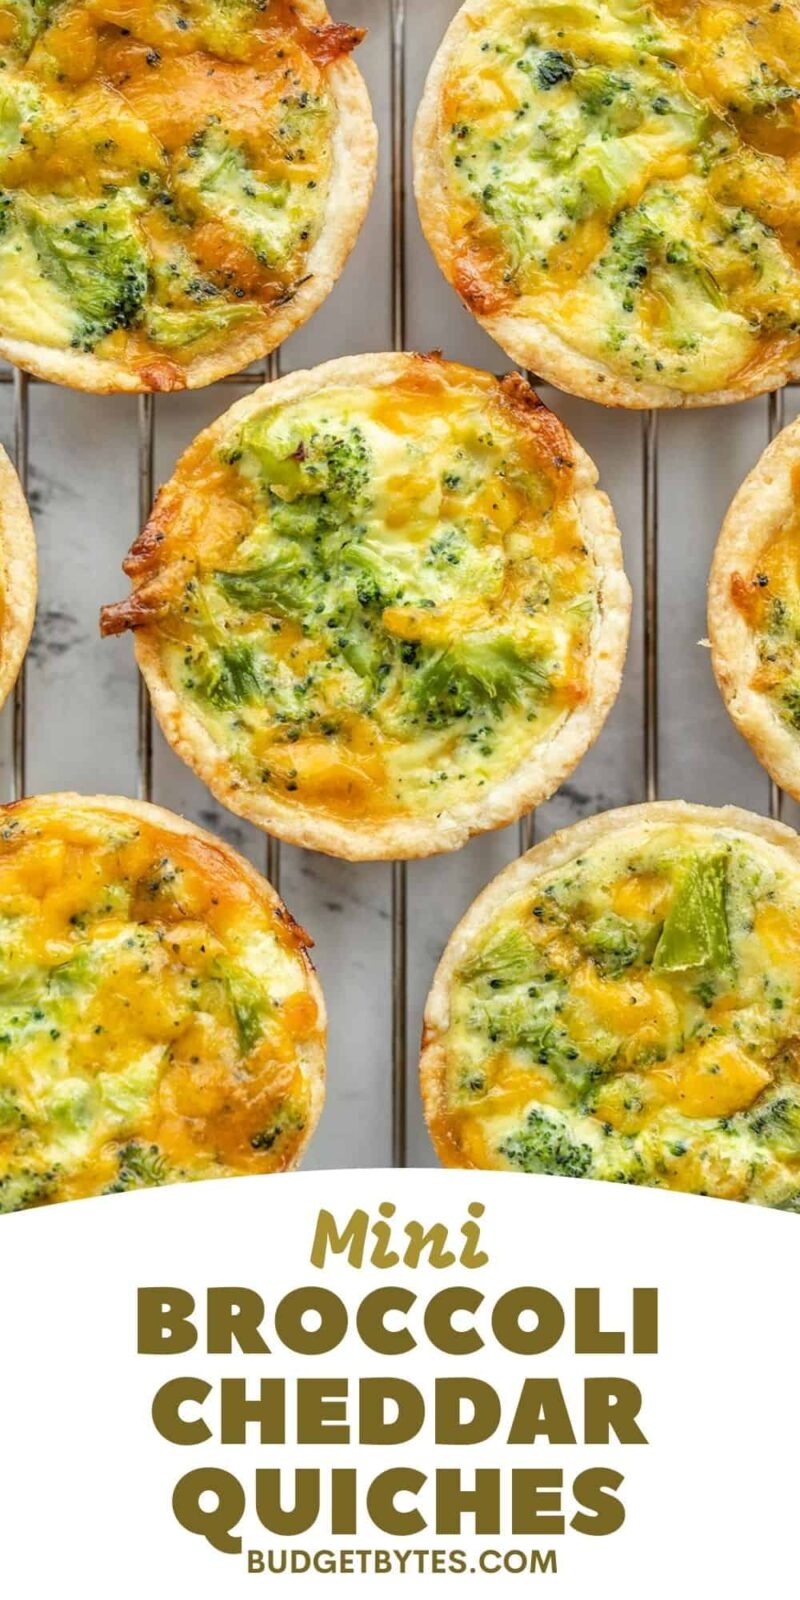 mini broccoli cheddar quiches on a wire rack, title text at the bottom.